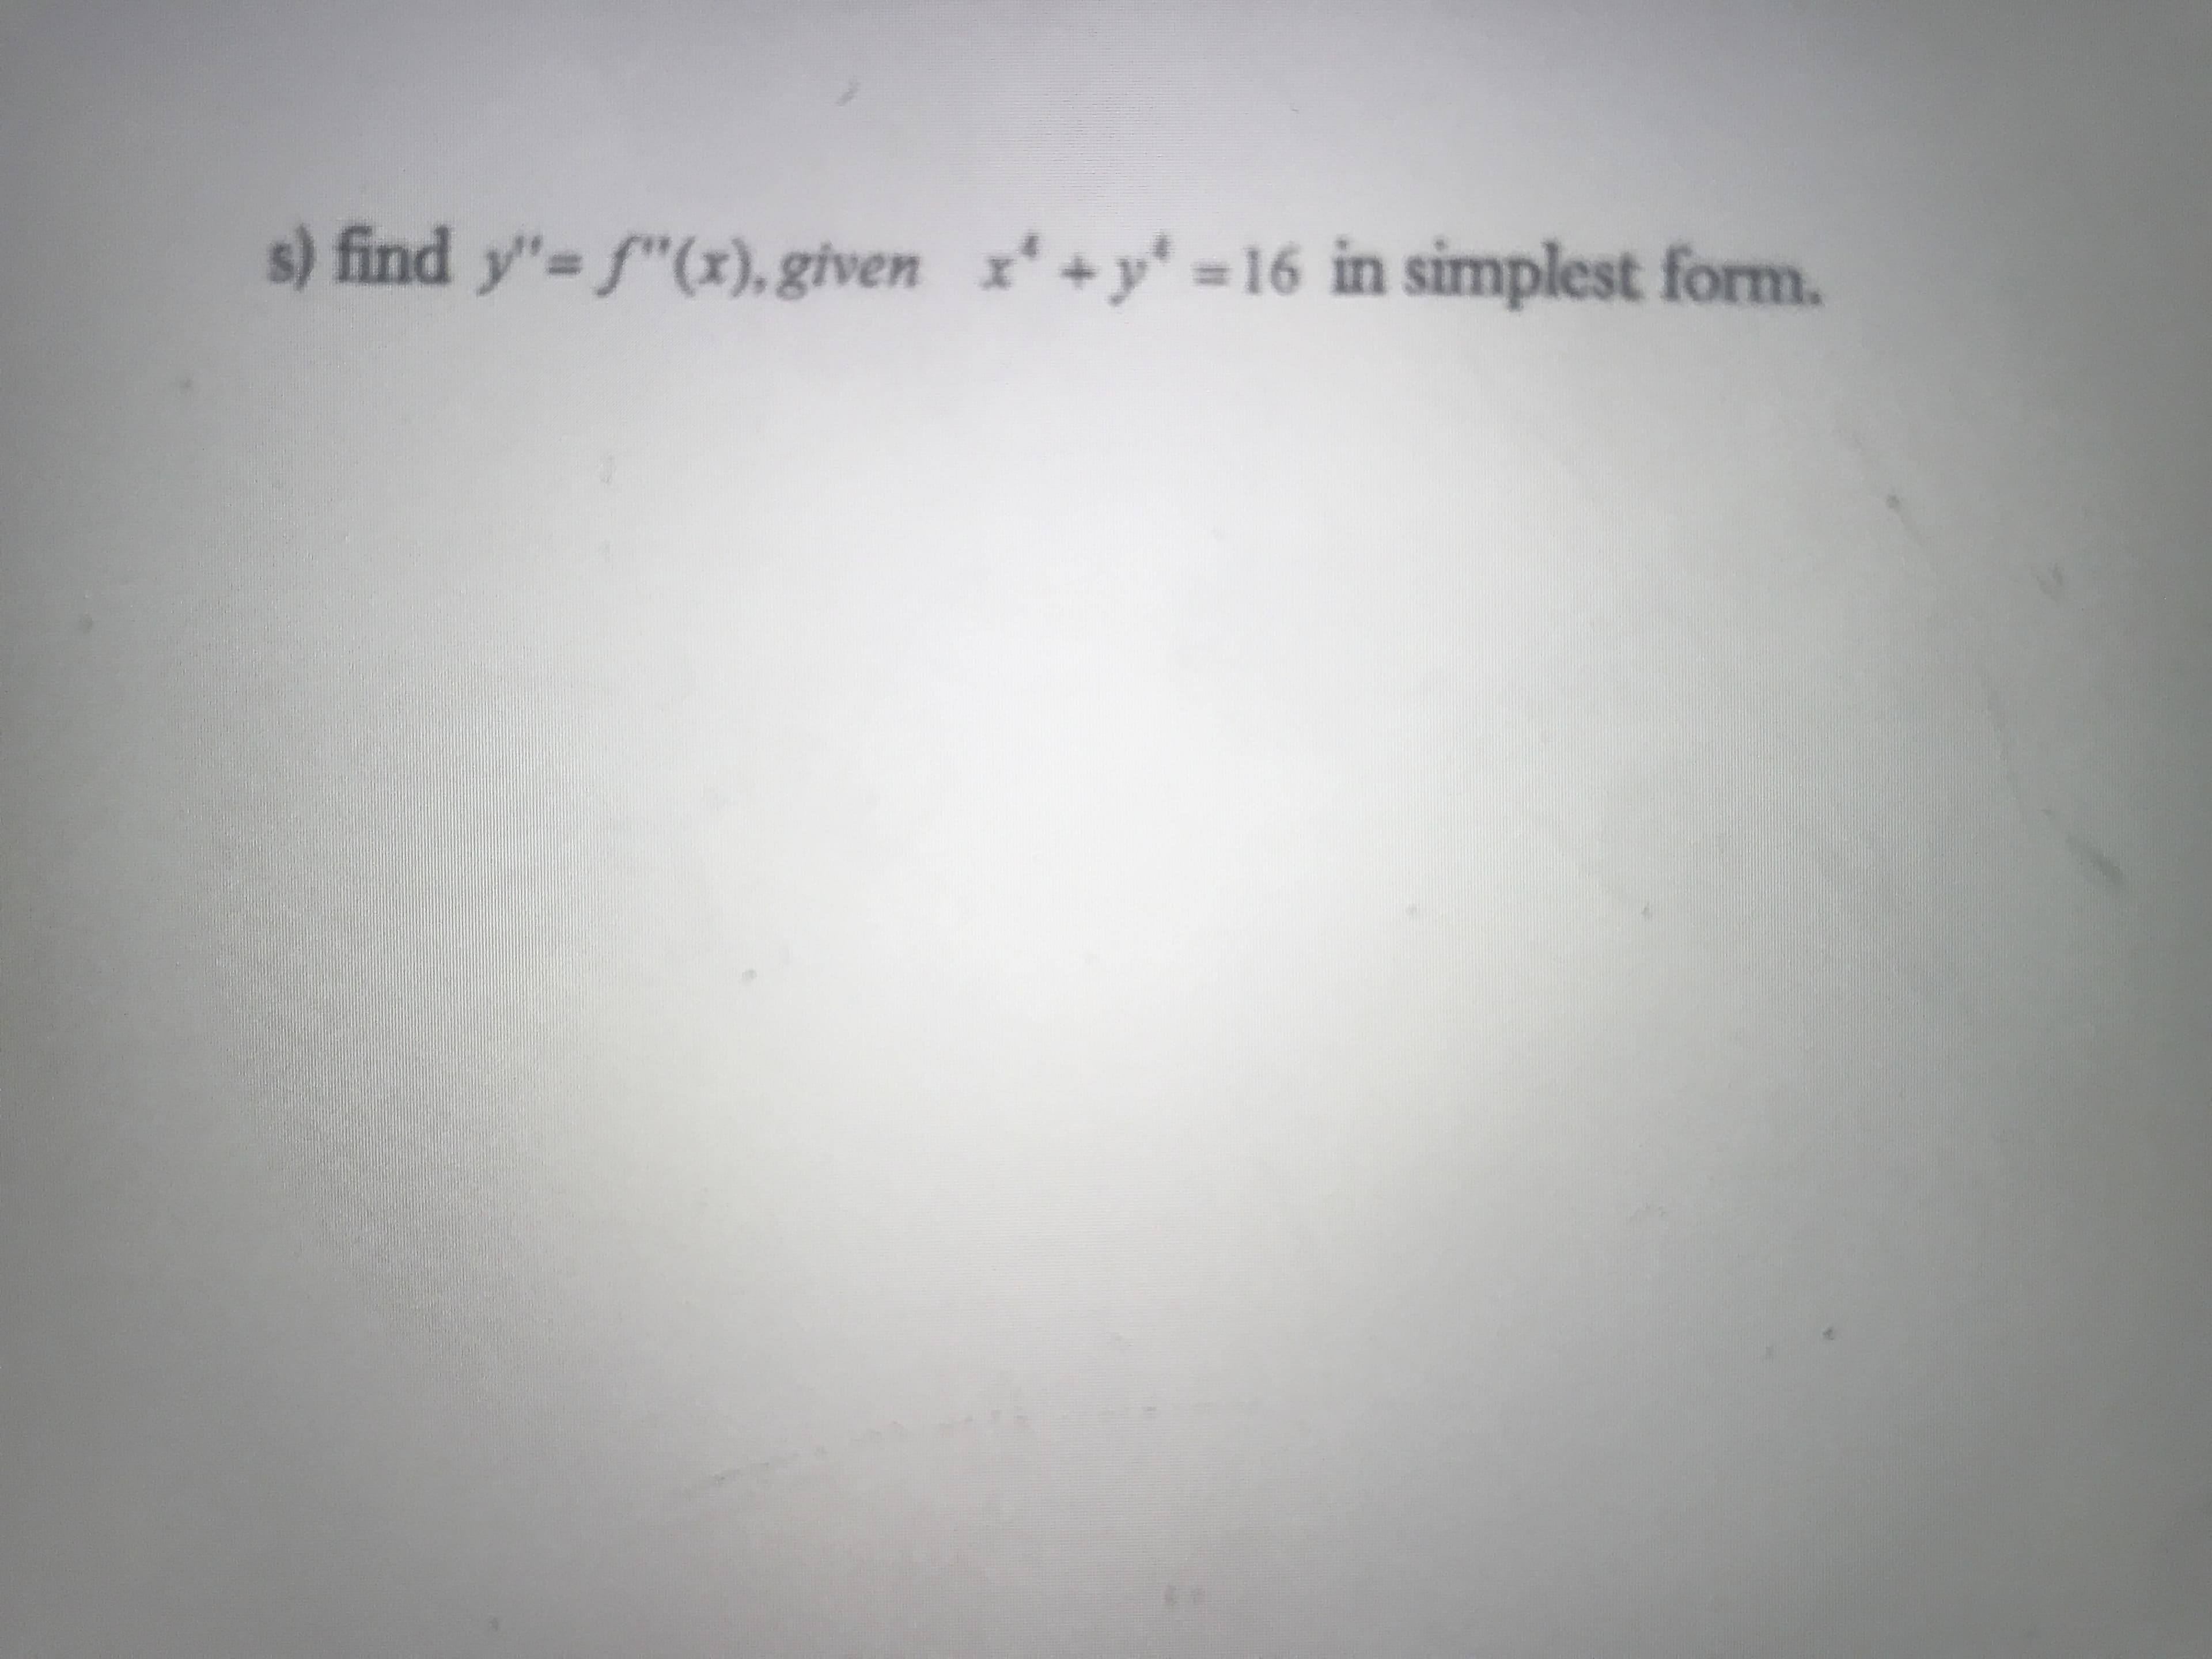 s) find y"= f"(x), given x+y =16 in simplest form.
